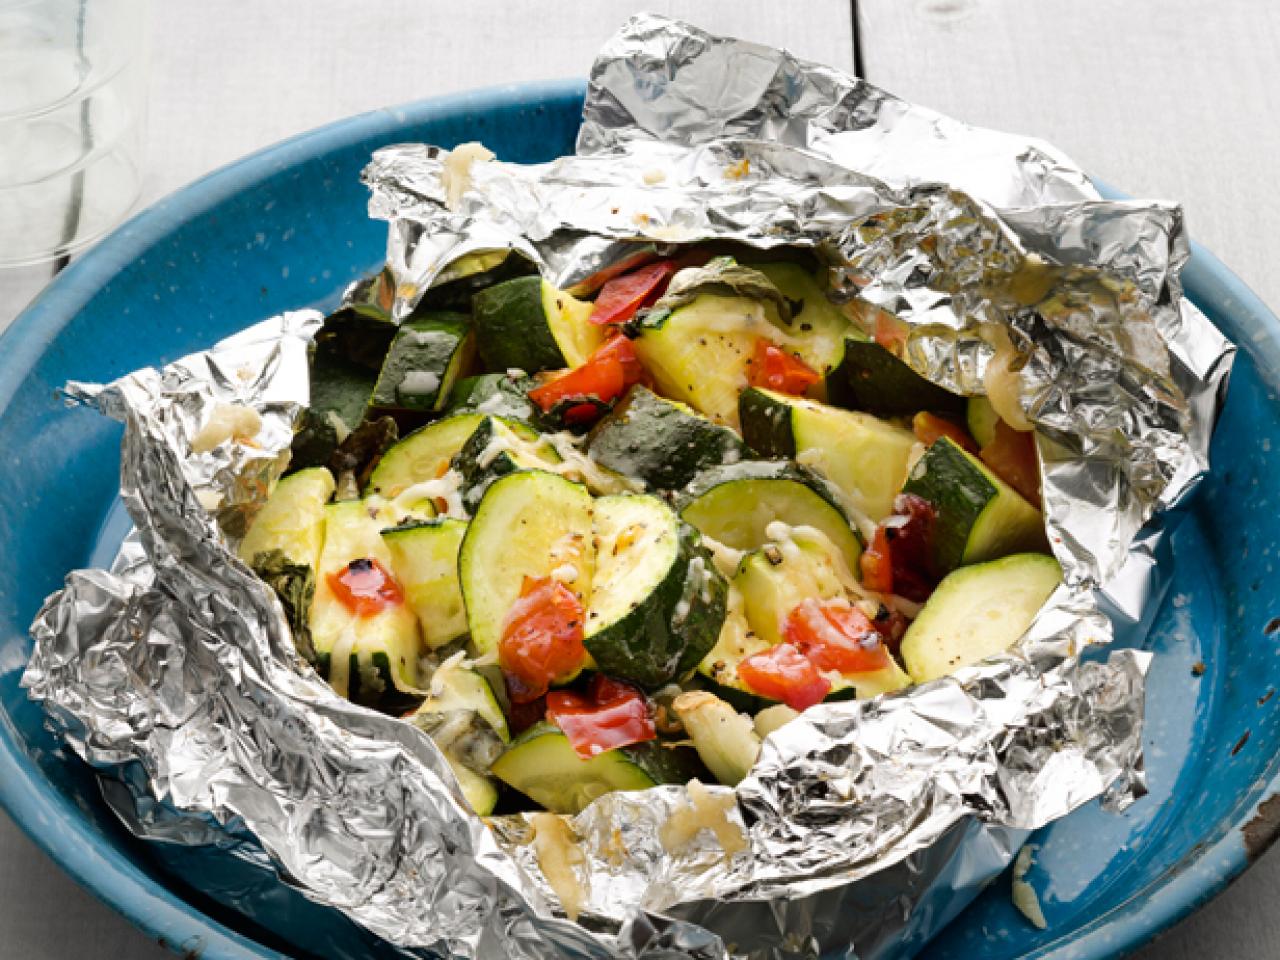 https://food.fnr.sndimg.com/content/dam/images/food/fullset/2012/5/4/3/FNM_060112-50-Things-to-Grill-in-Foil-Zucchini-and-Tomatoes_s4x3.jpg.rend.hgtvcom.1280.960.suffix/1371606235746.jpeg